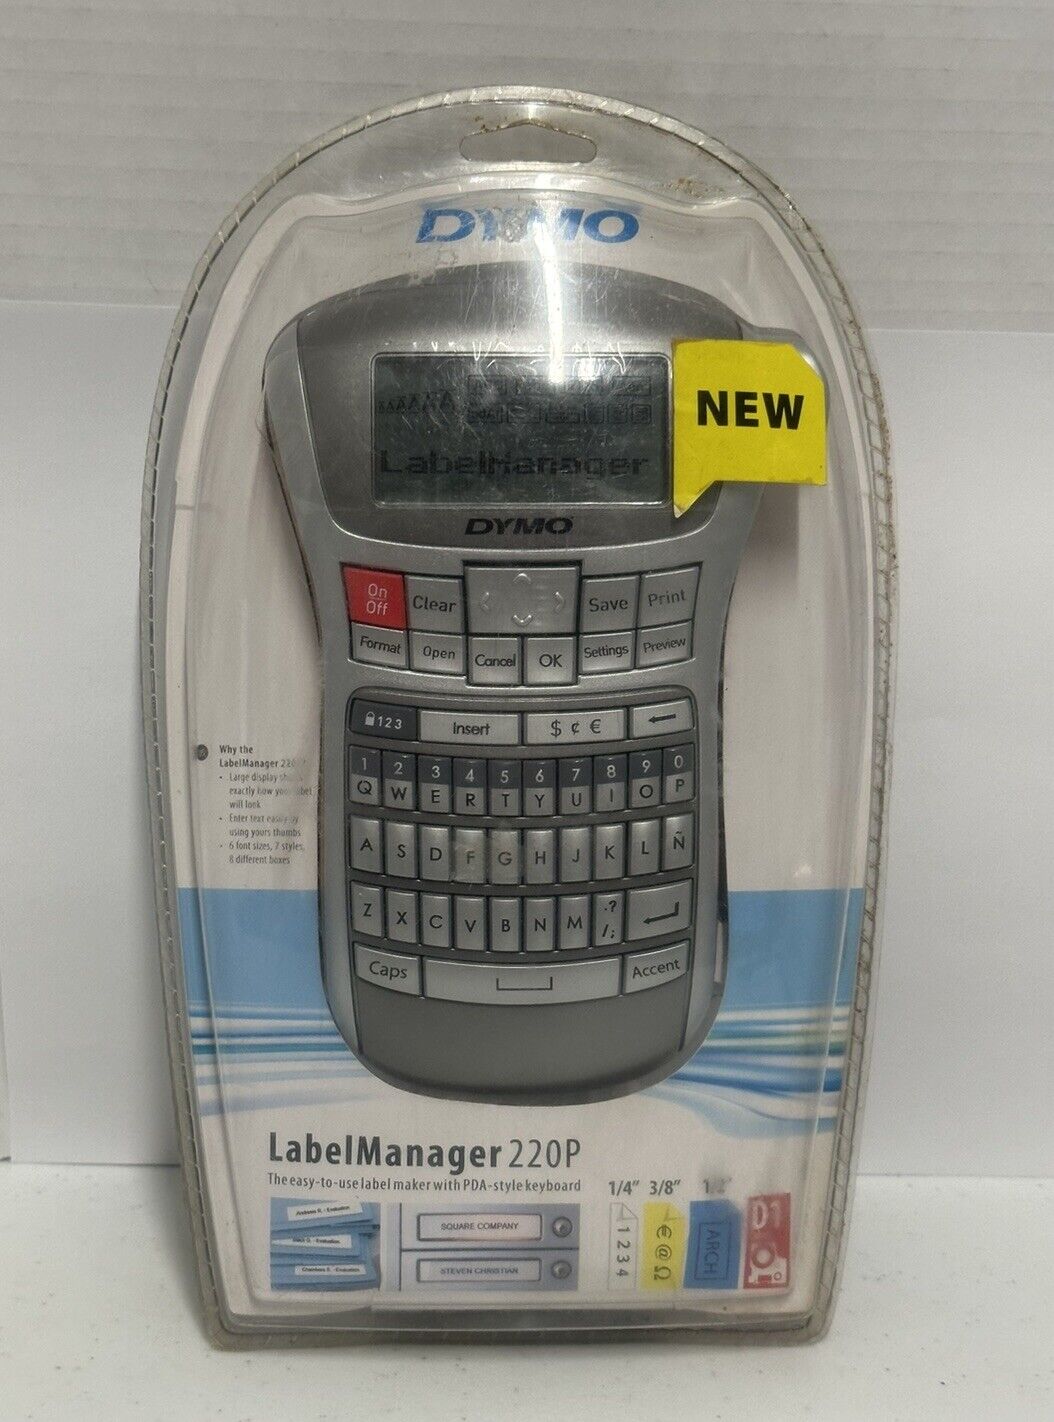 Dymo LabelManager 220p 1738347 Thermal Printer Portable New Label Maker